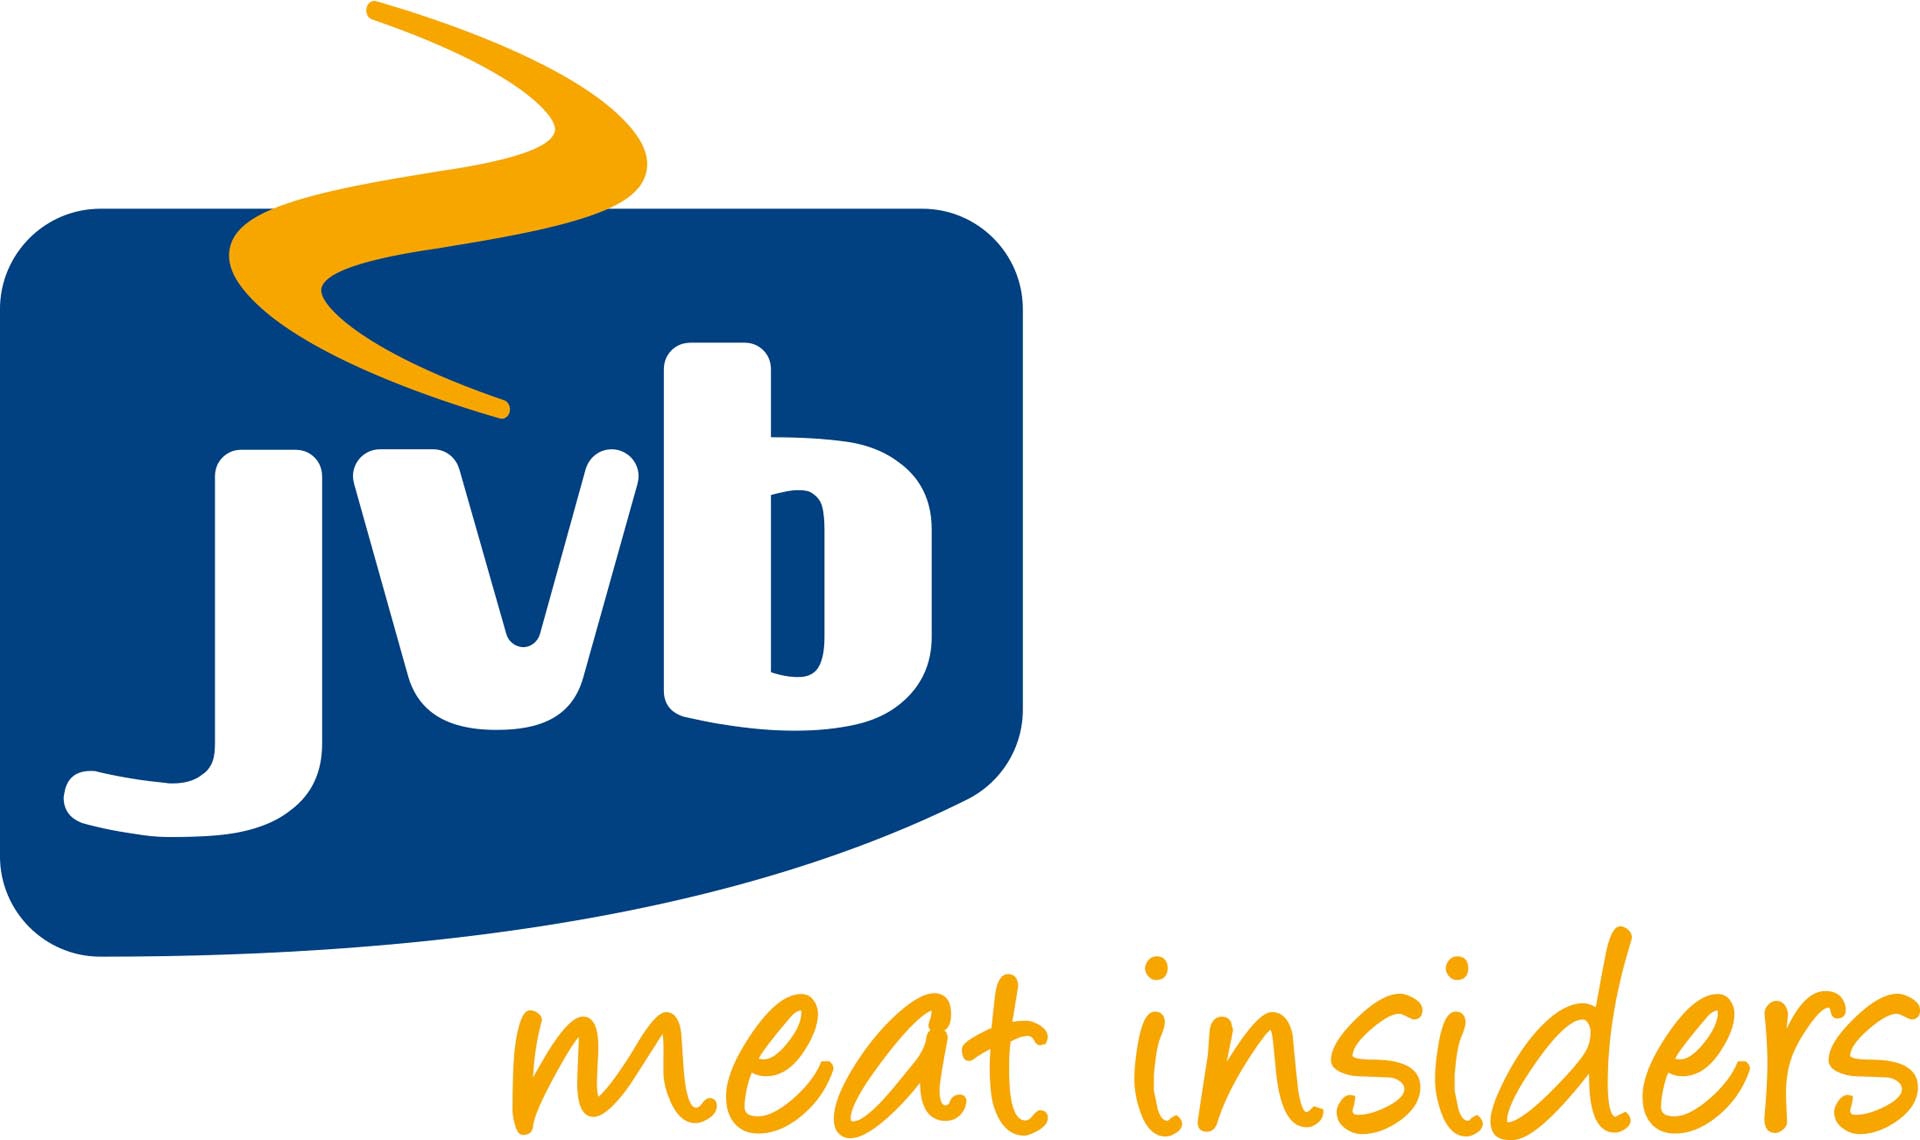 Acquisition JvB Meat Insiders bv